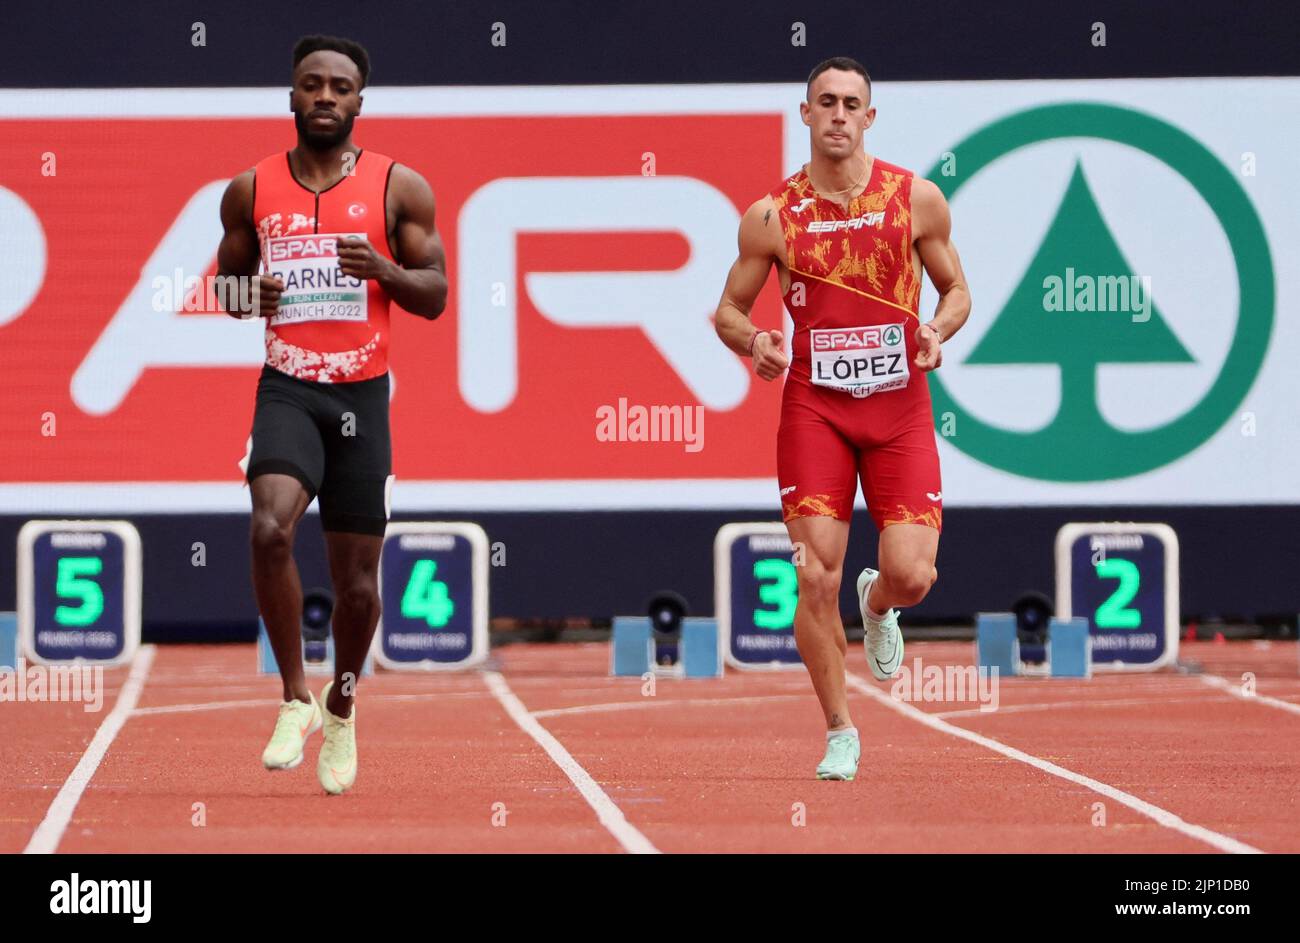 Athletics - 2022 European Championships - Olympiastadion, Munich, Germany - August 15, 2022 Spain's Sergio Lopez is seen with Turkey's Emre Zafer Barnes before been disqualified on the Men's Decathlon 100m - Heats REUTERS/Wolfgang Rattay Stock Photo